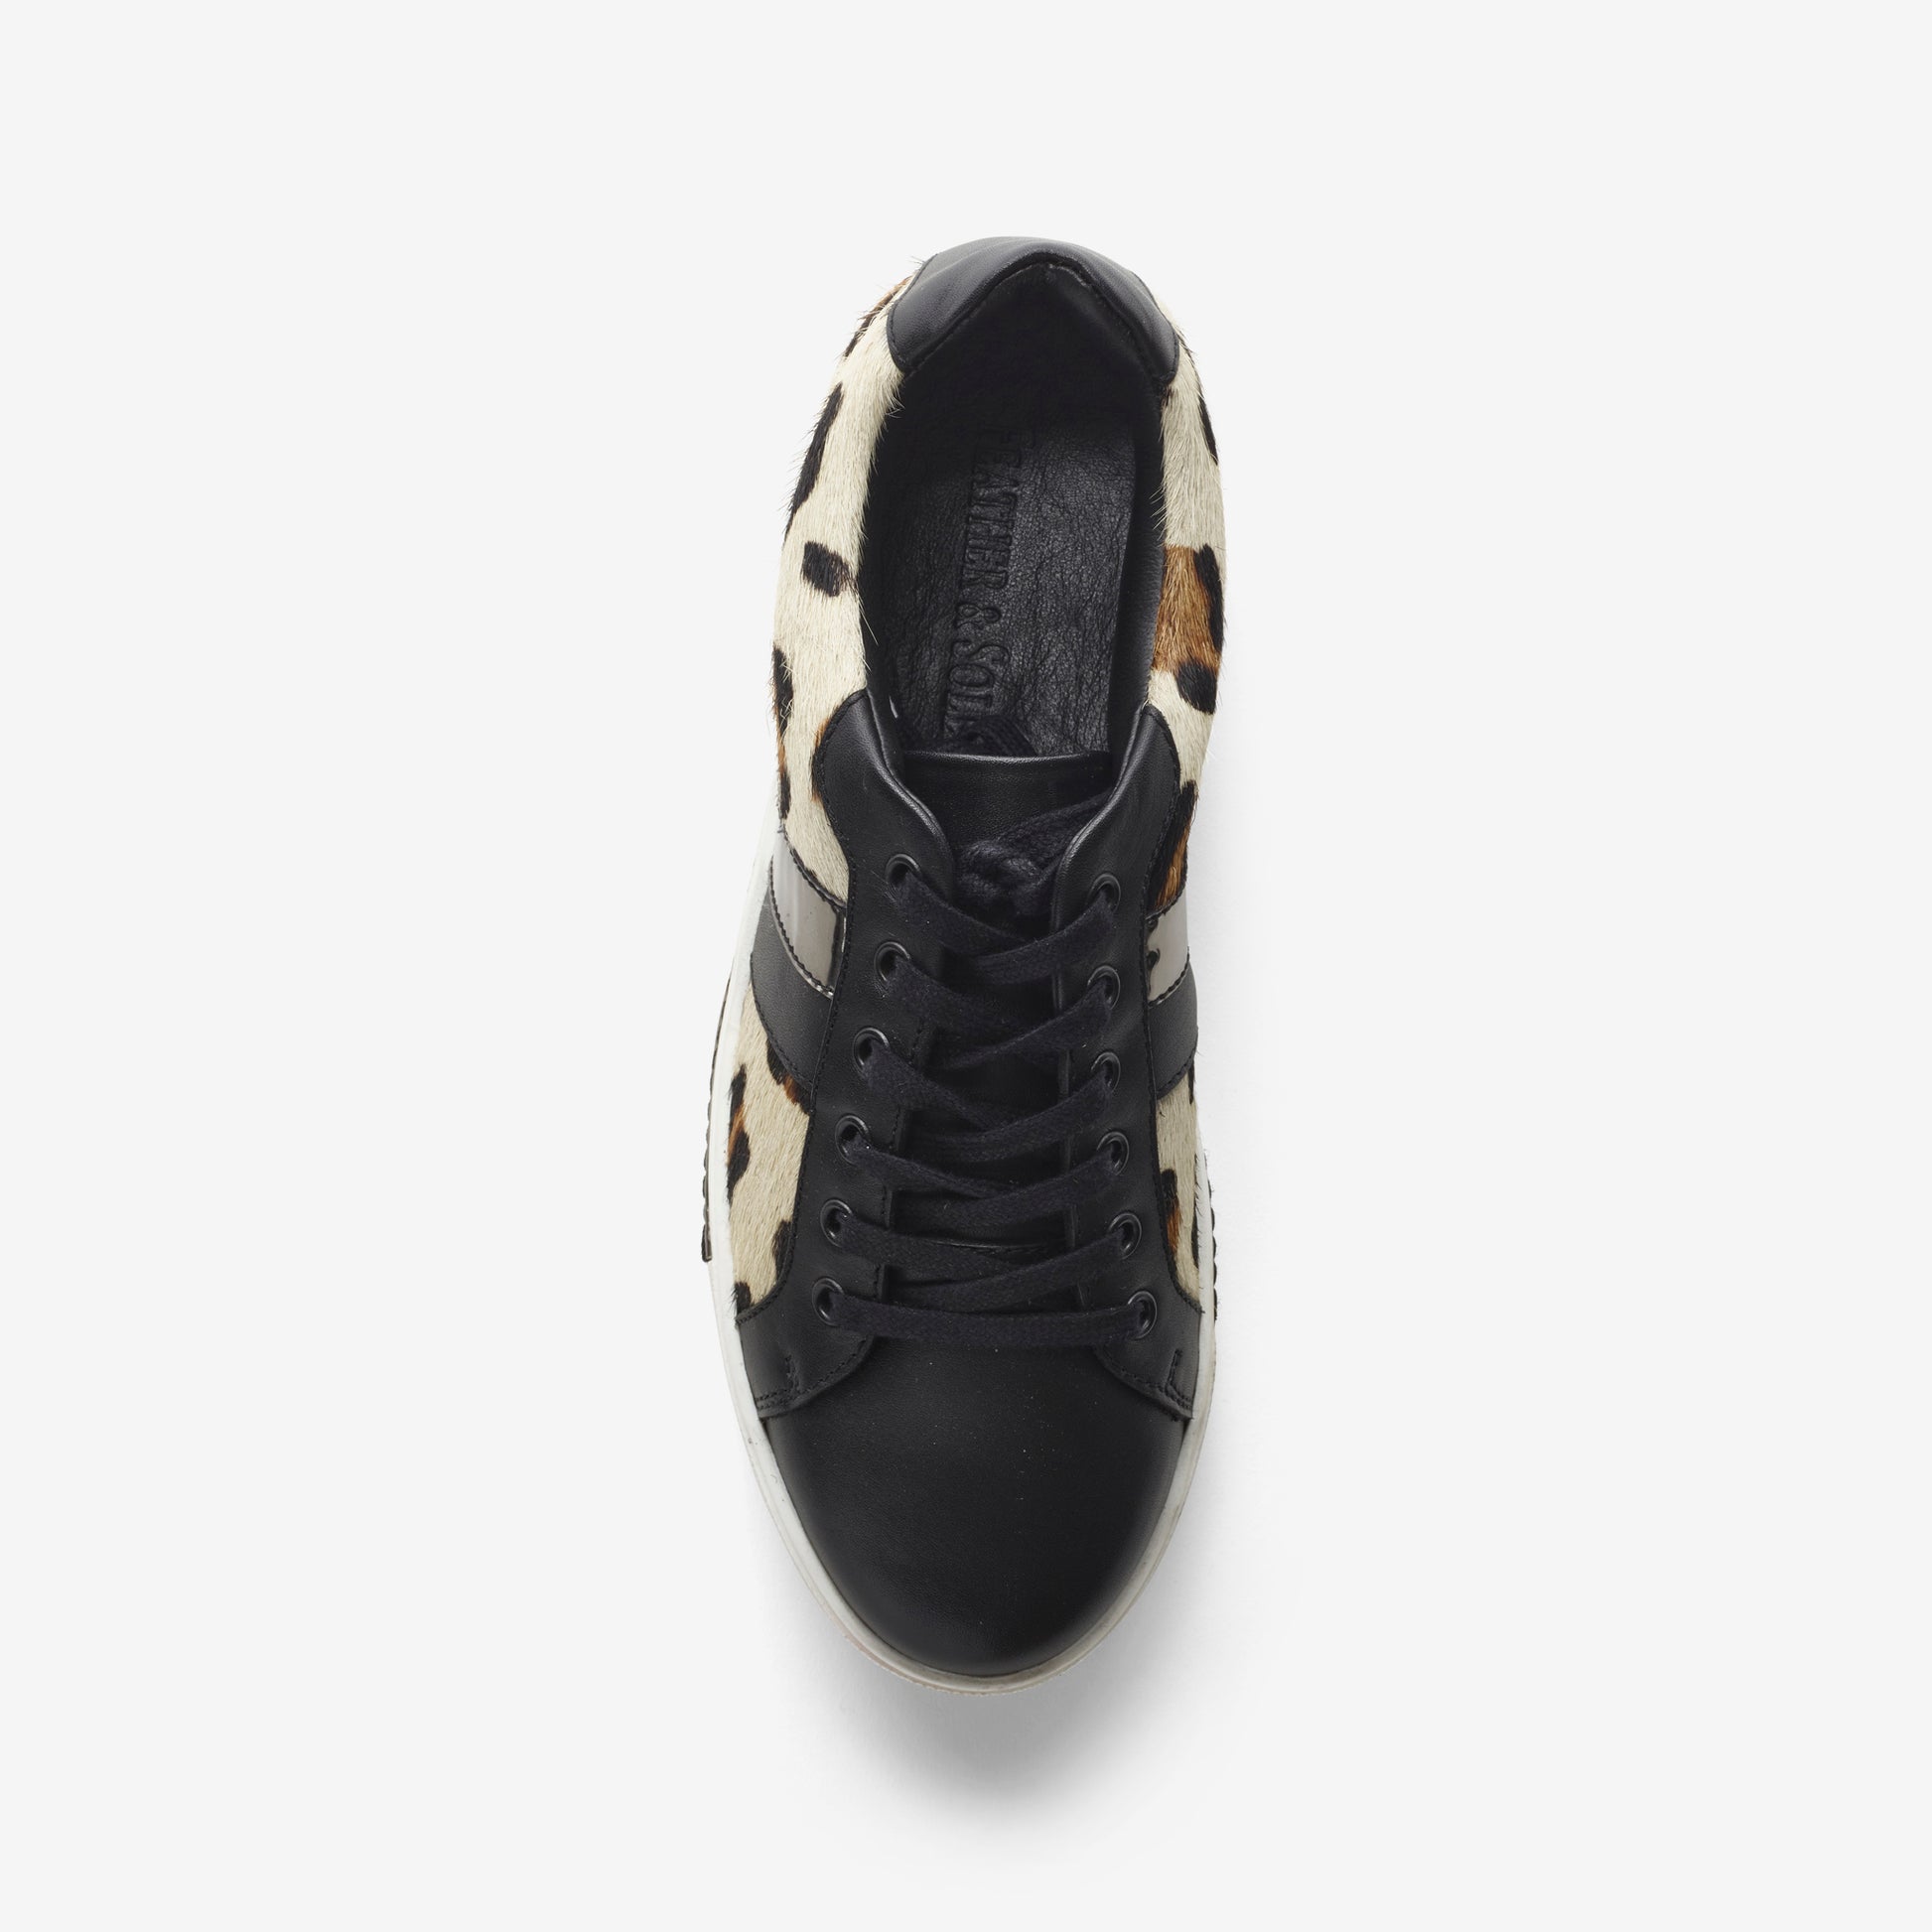 Wide fit leather lace up trainer in snow leopard print